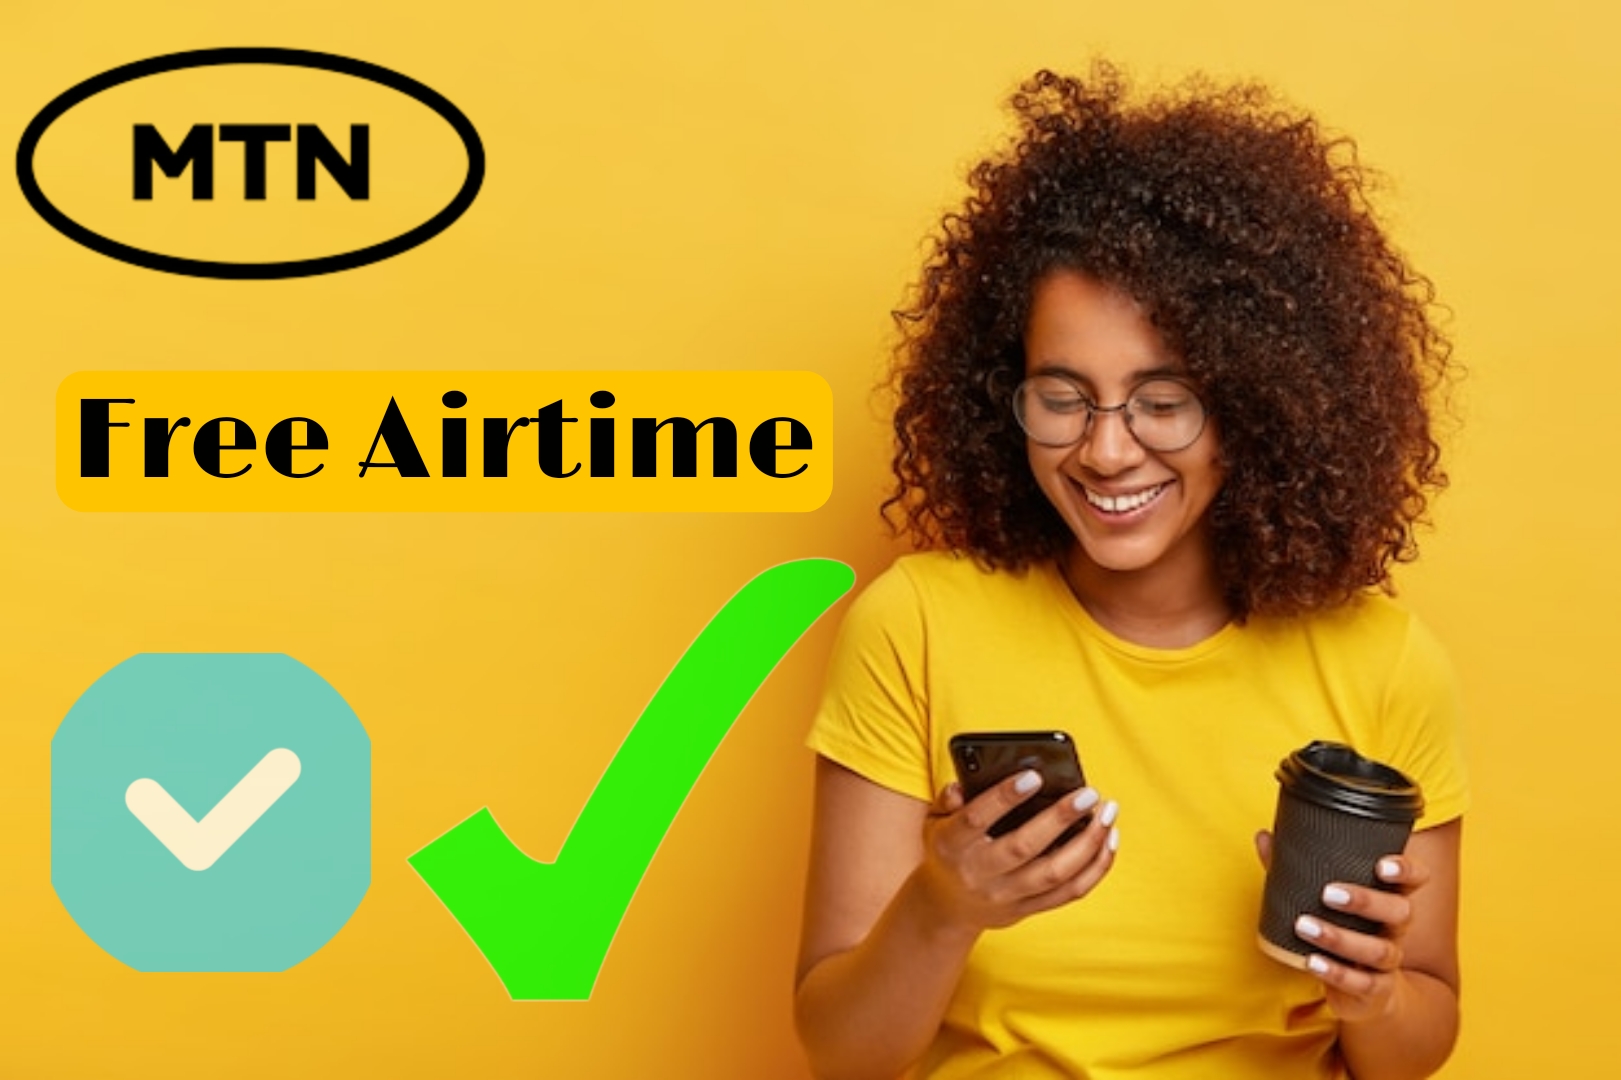 Mtn Free Airtime